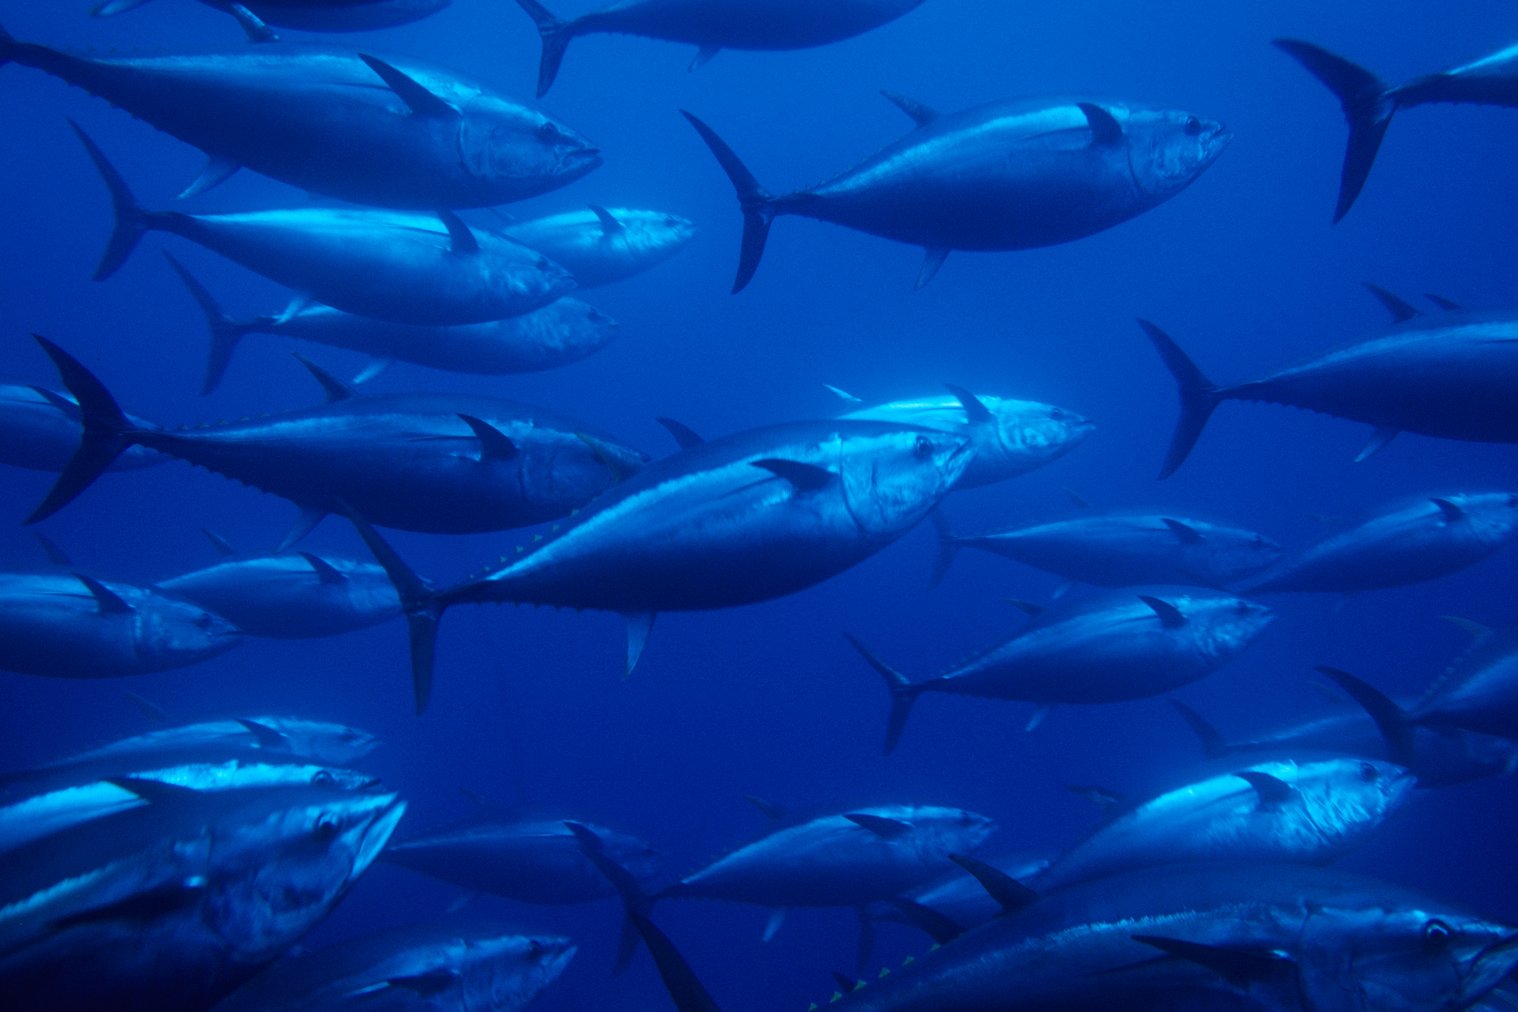 A picture showing a school of Pacific bluefin tuna